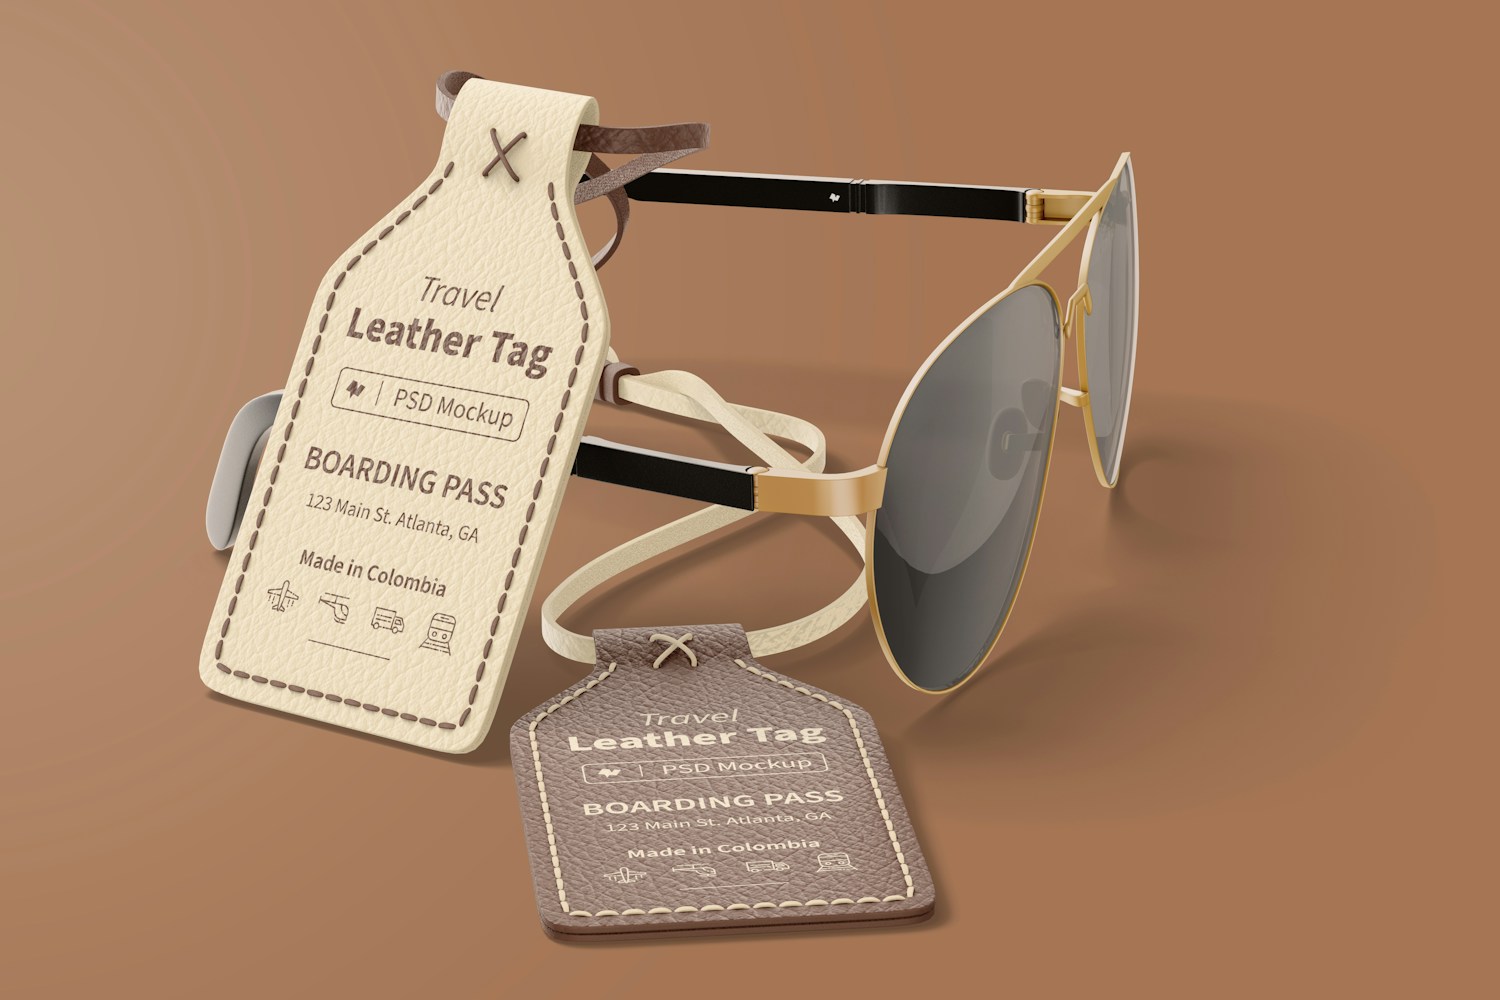 Travel Leather Tag Mockup, with Glasses